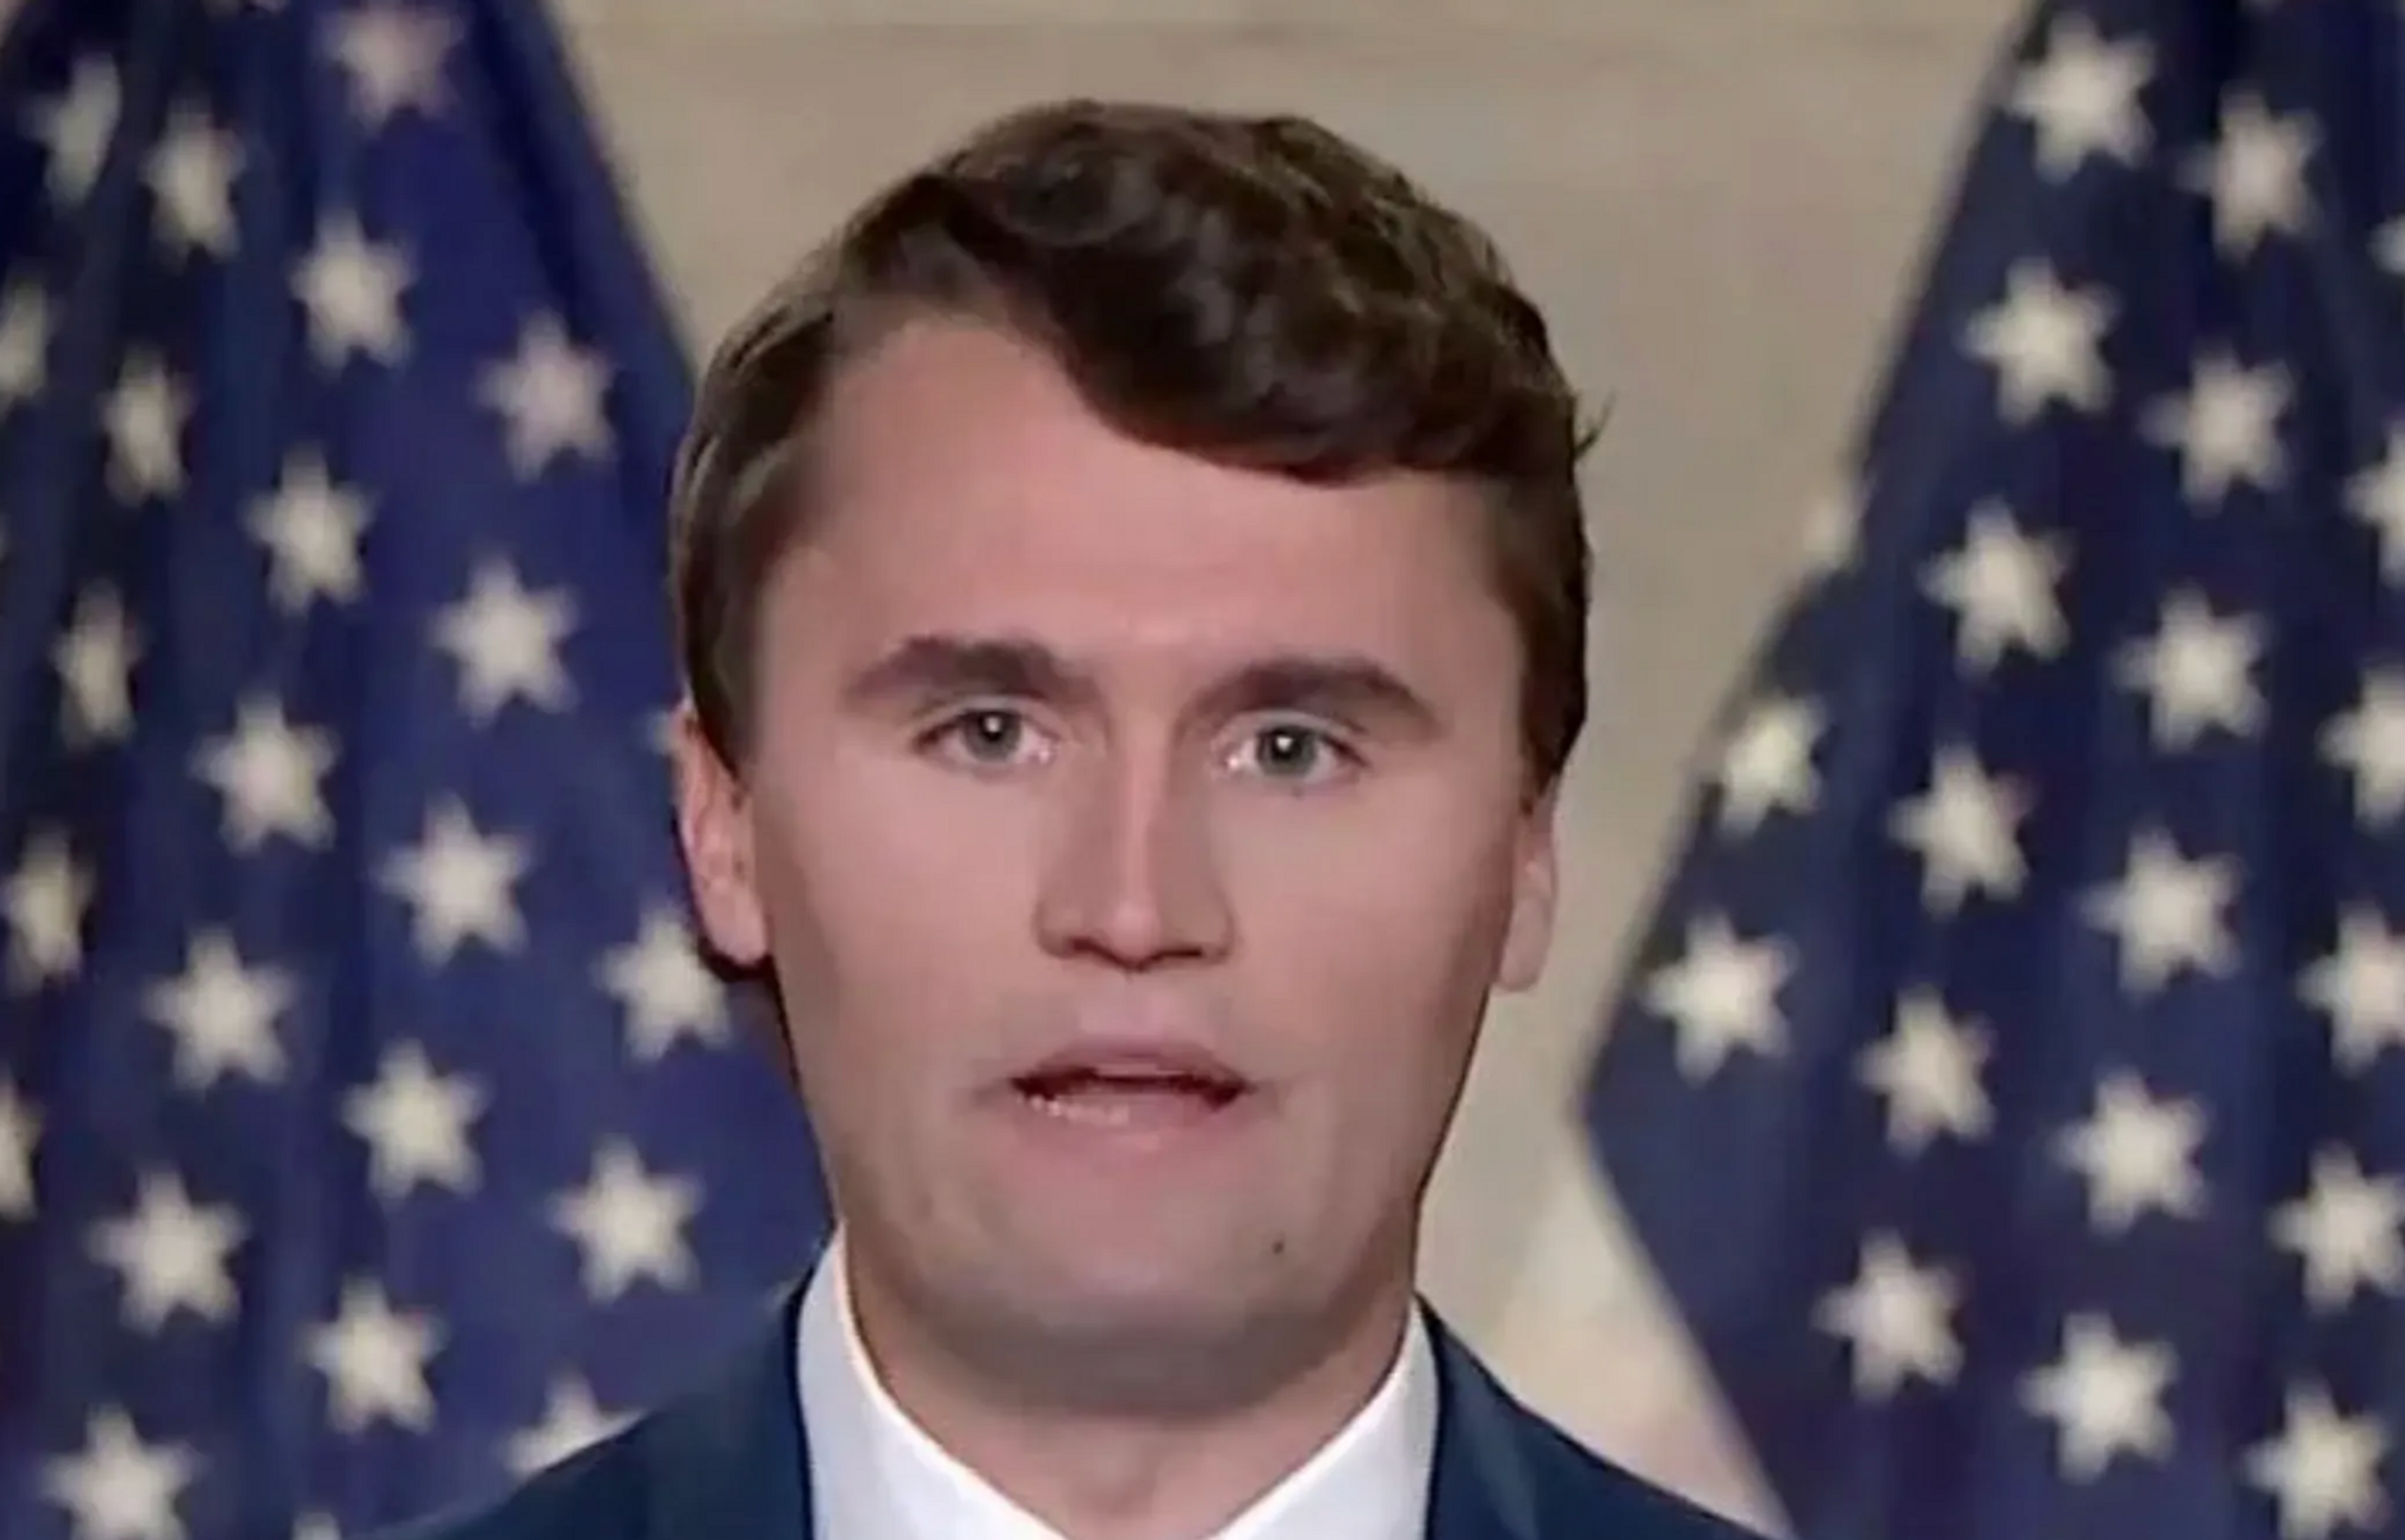 Charlie Kirk Spews Transphobic Screed Urging Men to Physically Bar Trans Athletes From Competing in Sporting Events